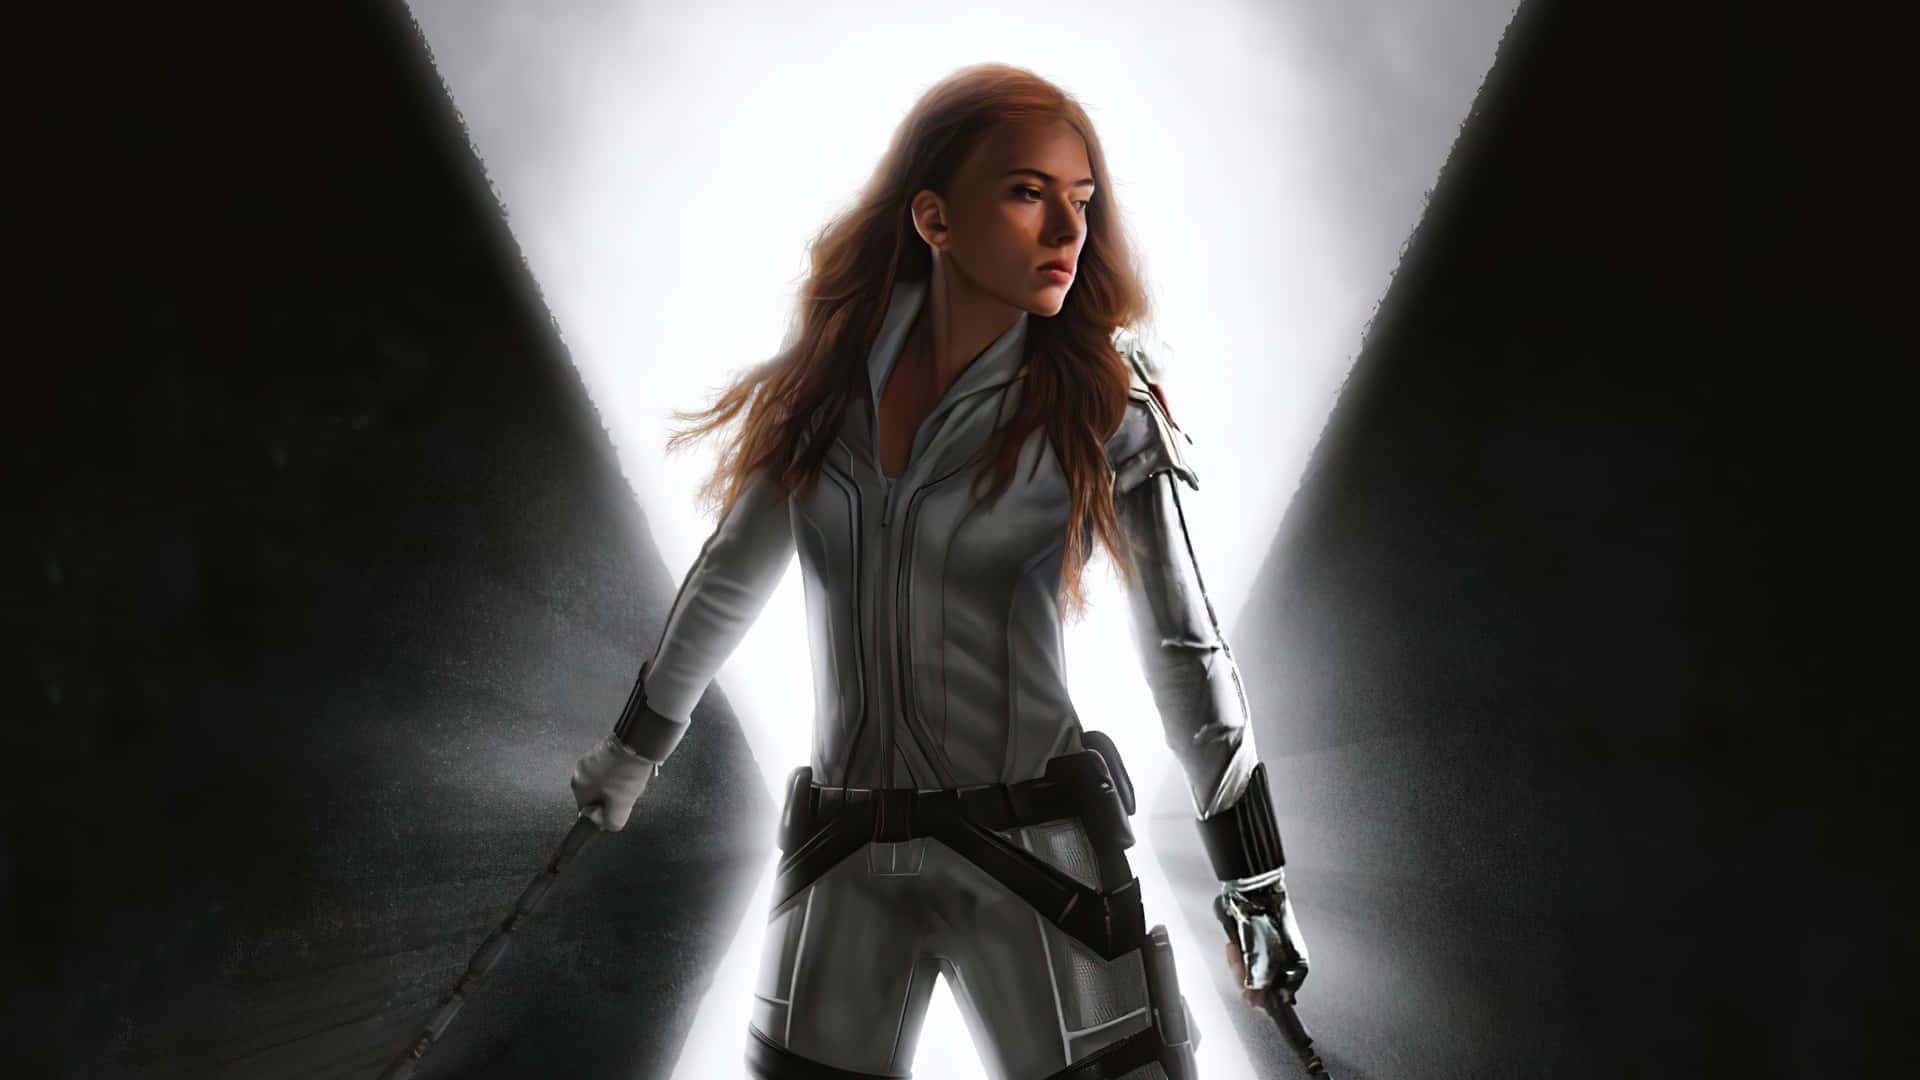 Natasha Romanoff is ready to take on the villains of the Marvel Cinematic Universe. Wallpaper